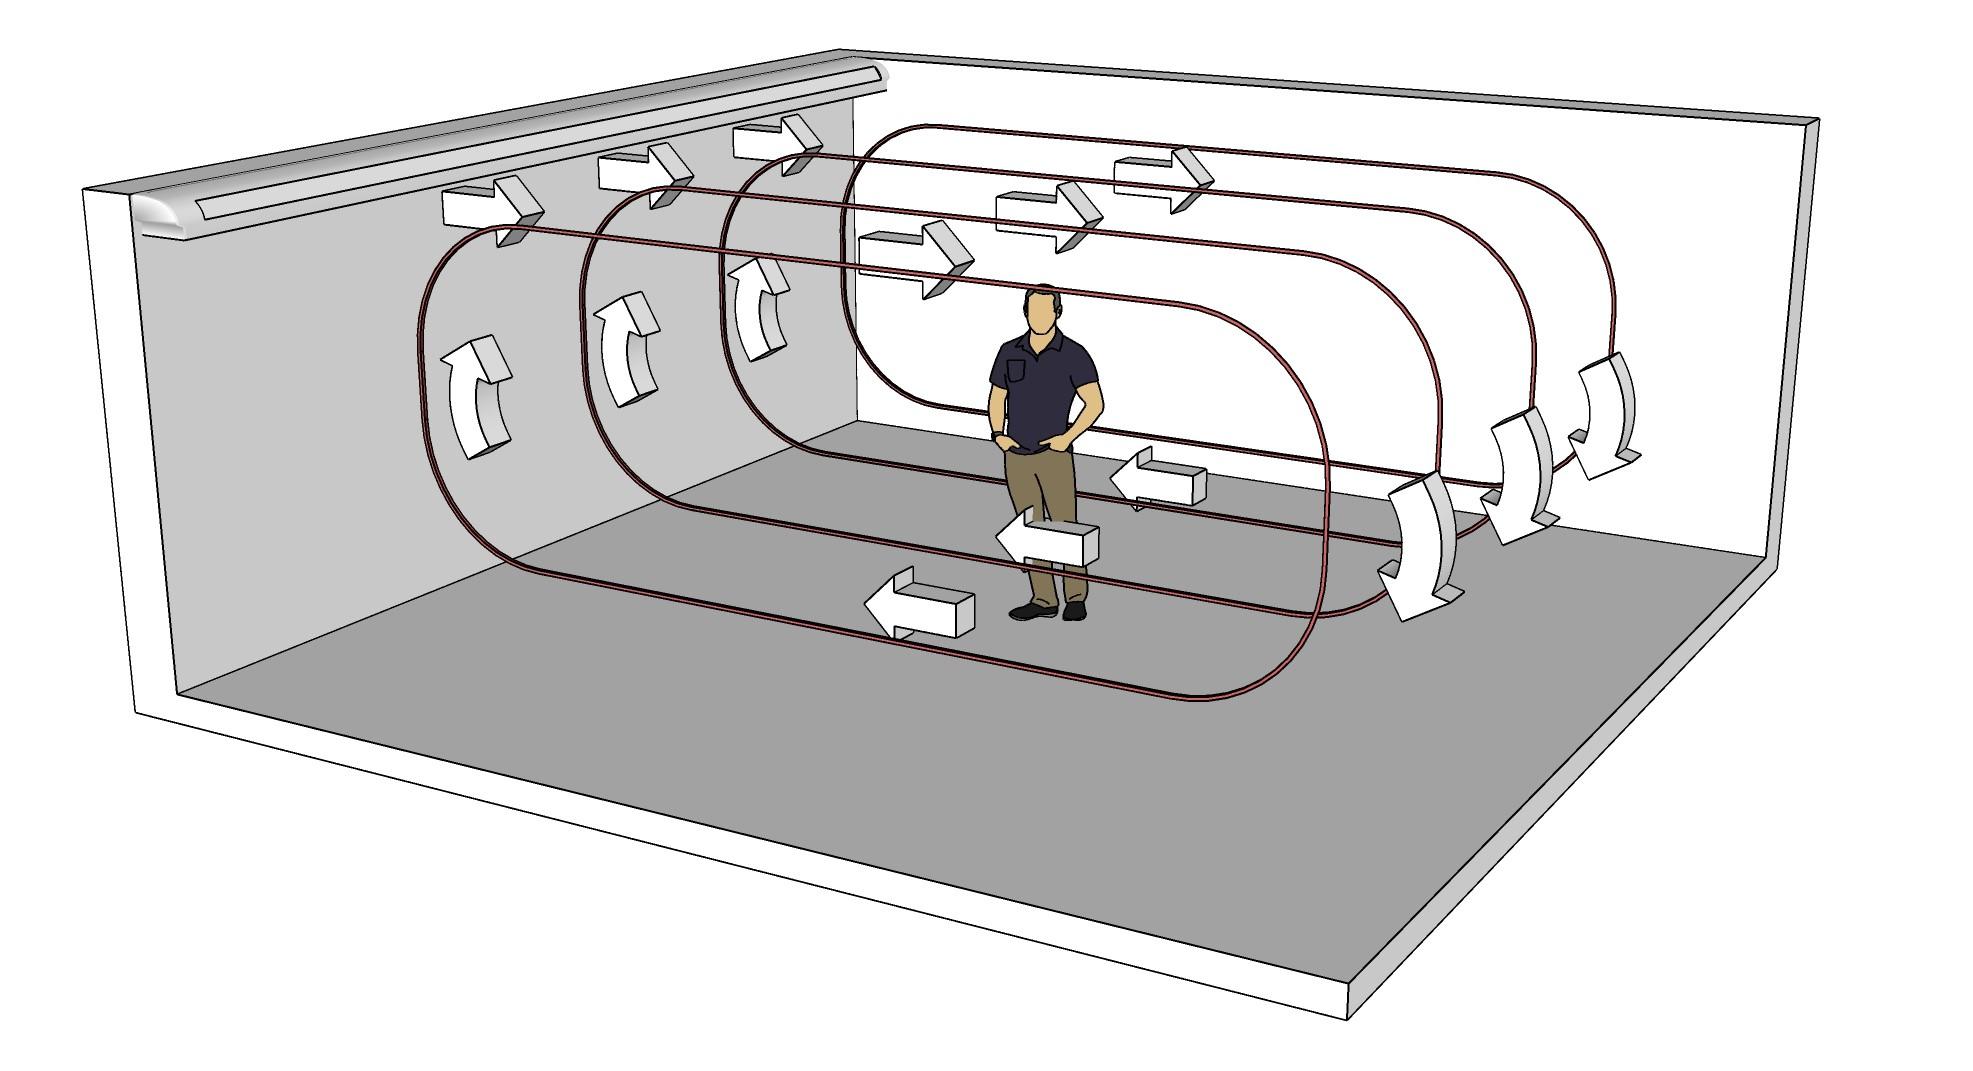 Schematic of a room configuration illustrating air recirculation generated by an air-conditioning unit.